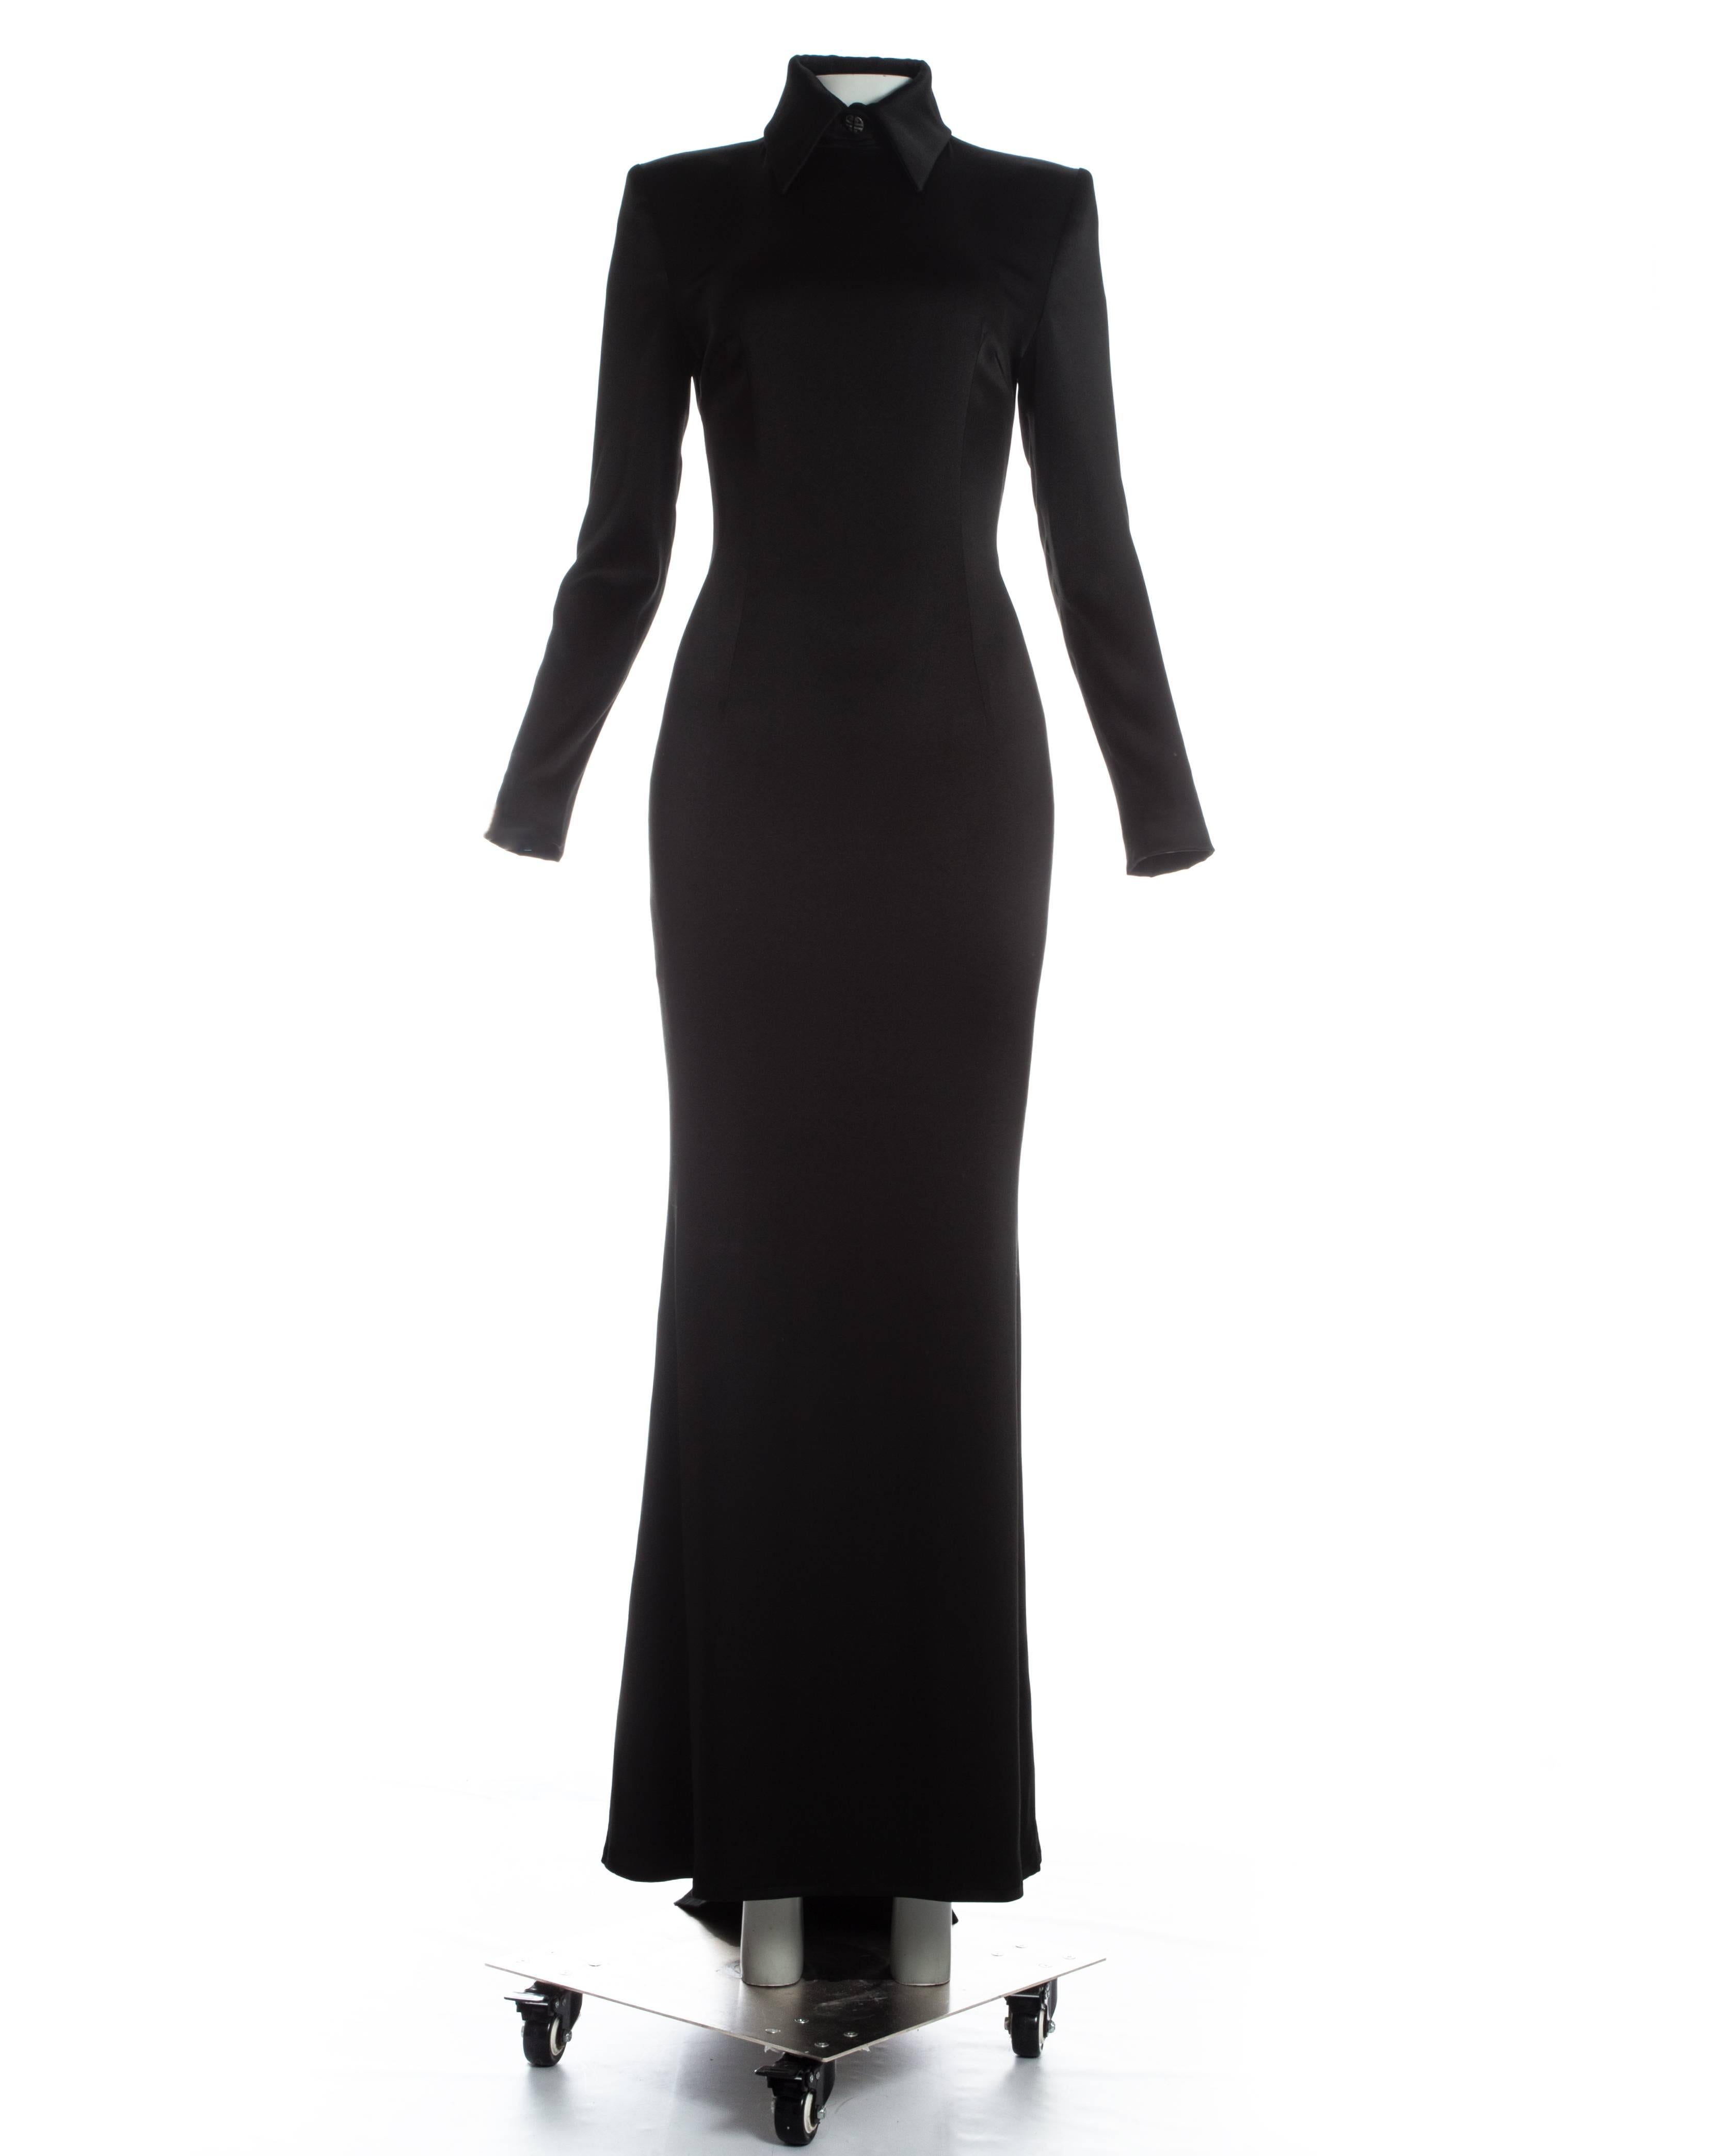 Black Givenchy by Alexander McQueen black silk evening dress with train, fw 1998